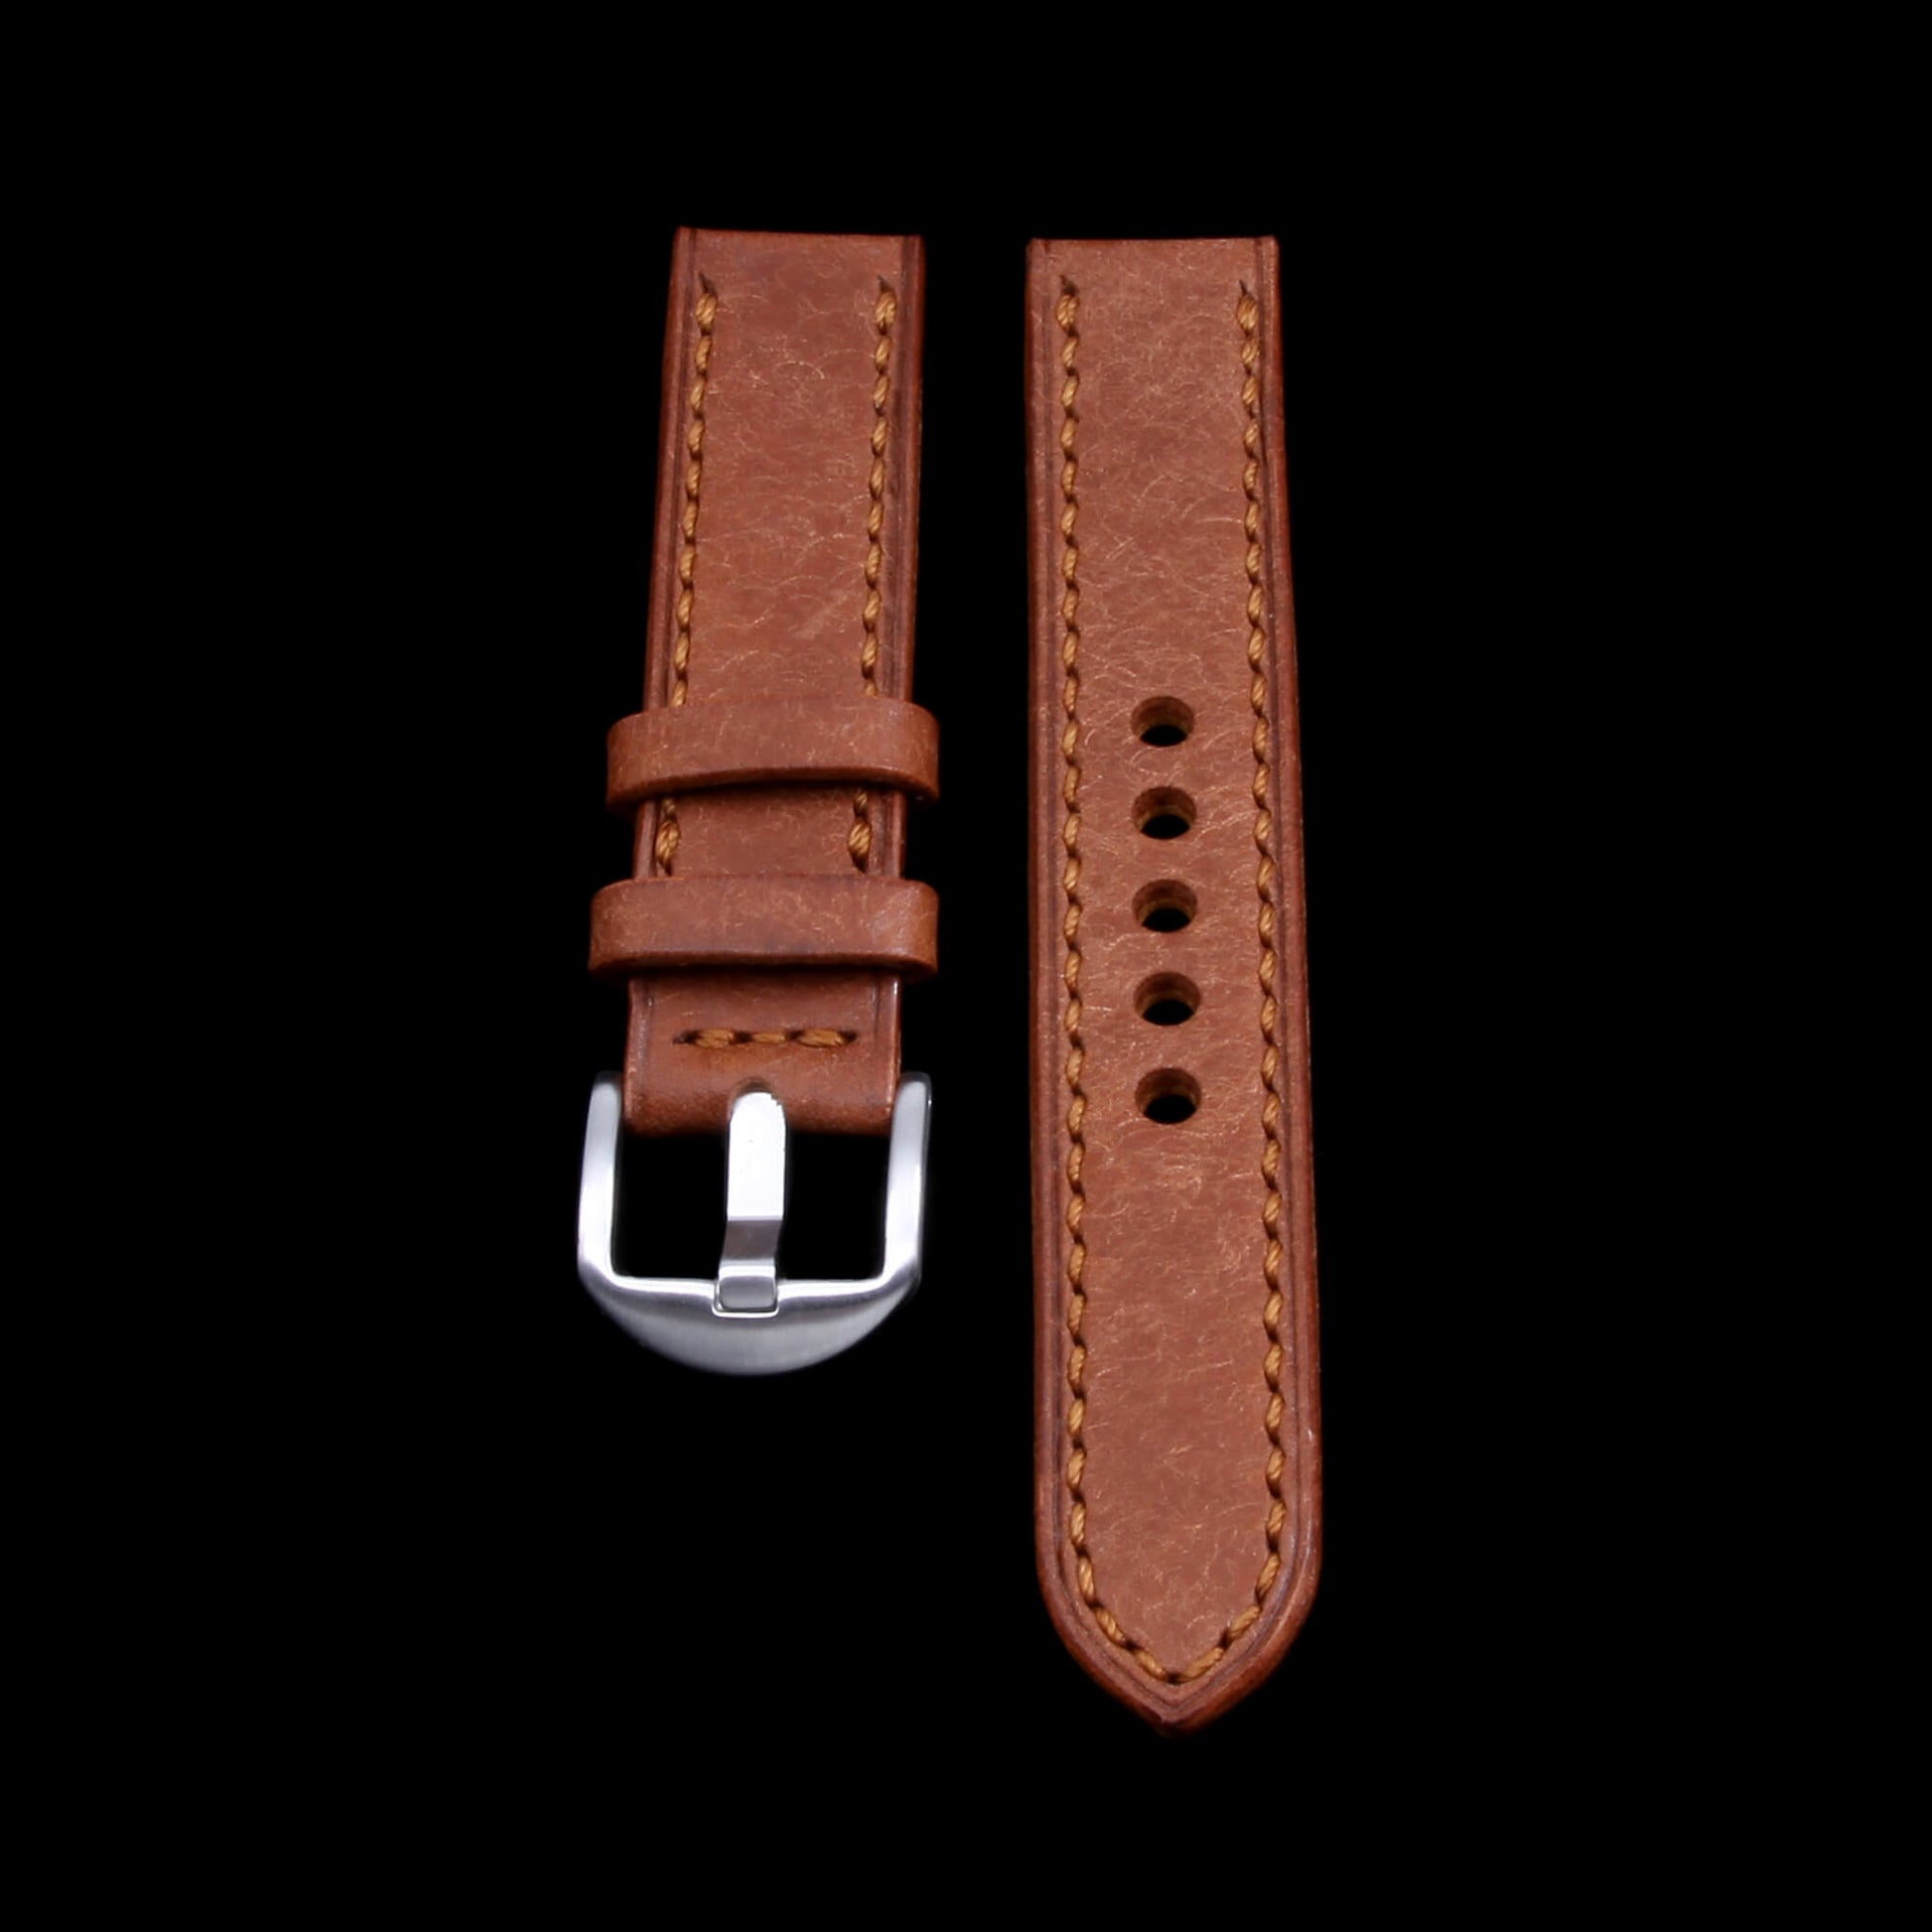 Leather Watch Strap, Rustic Russet | Full Stitch | Full Grain Italian Veg Tanned Leather | Cozy Handmade